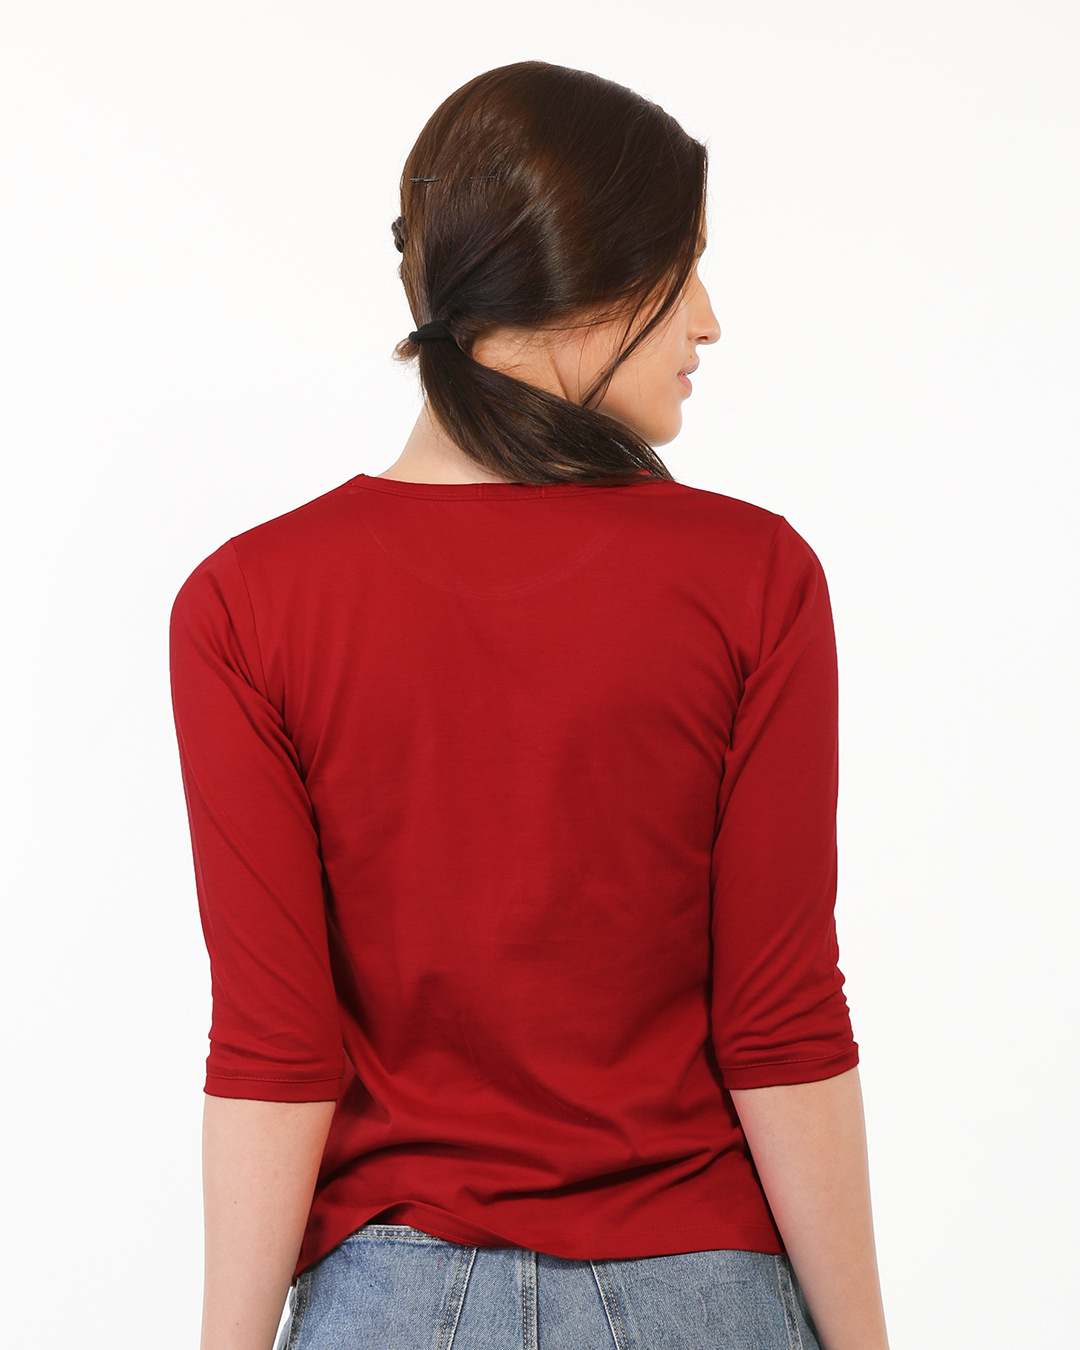 Shop Possibilities Women's Round Neck 3/4 Sleeve T-shirt-Back